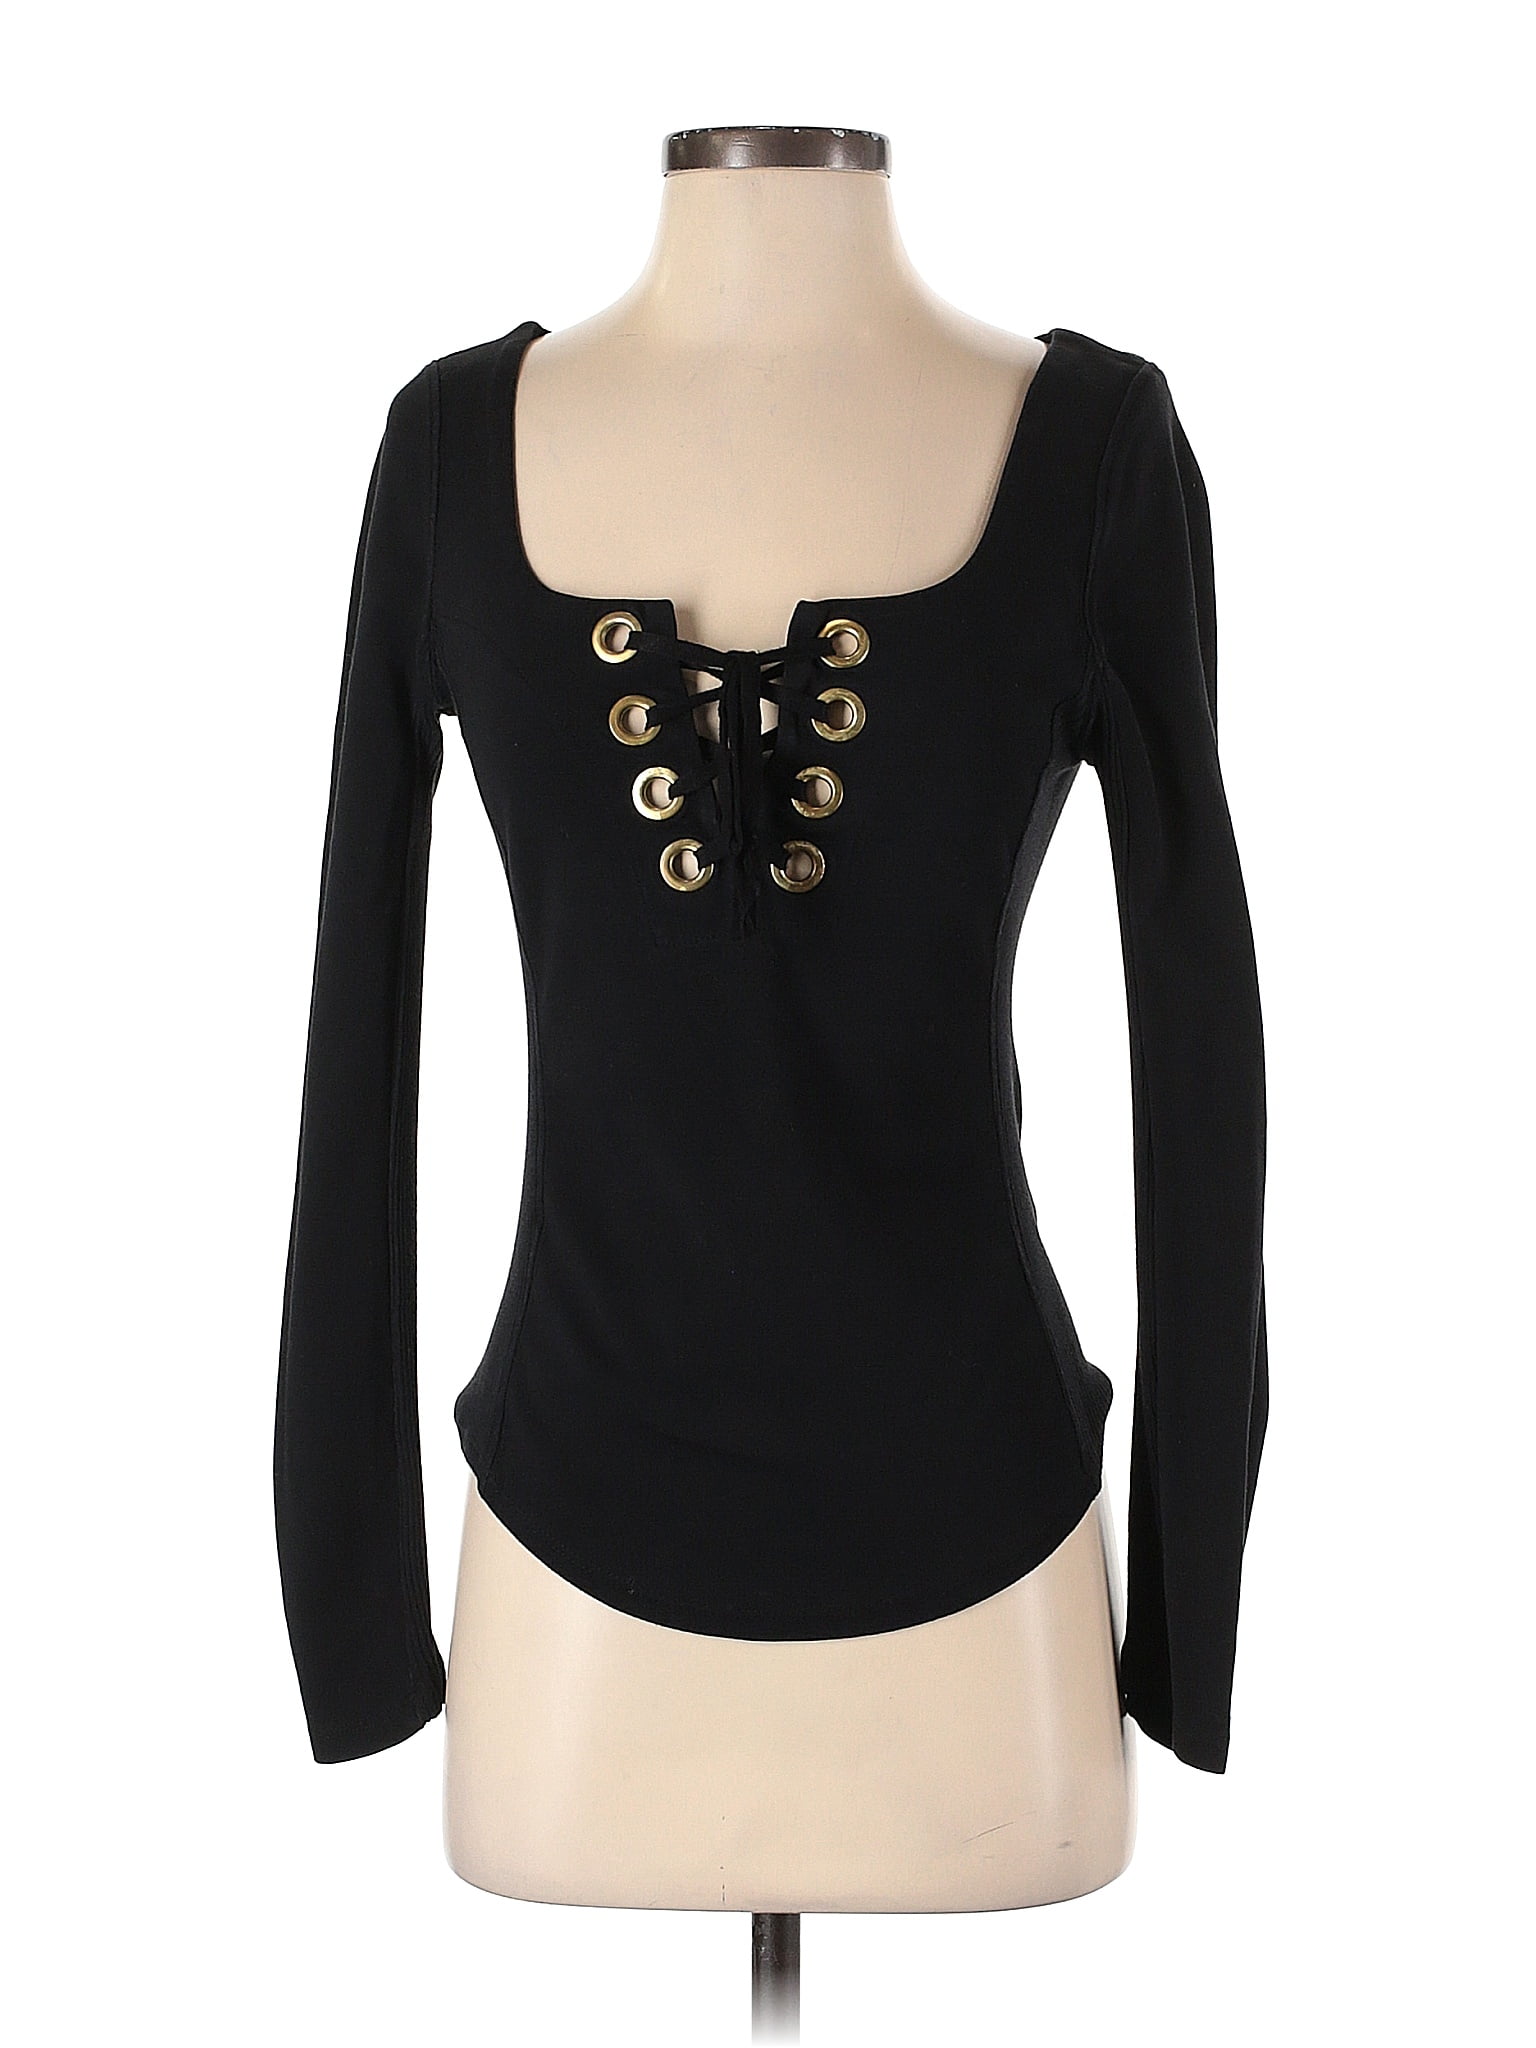 Free People Solid Black Long Sleeve Top Size S - 67% off